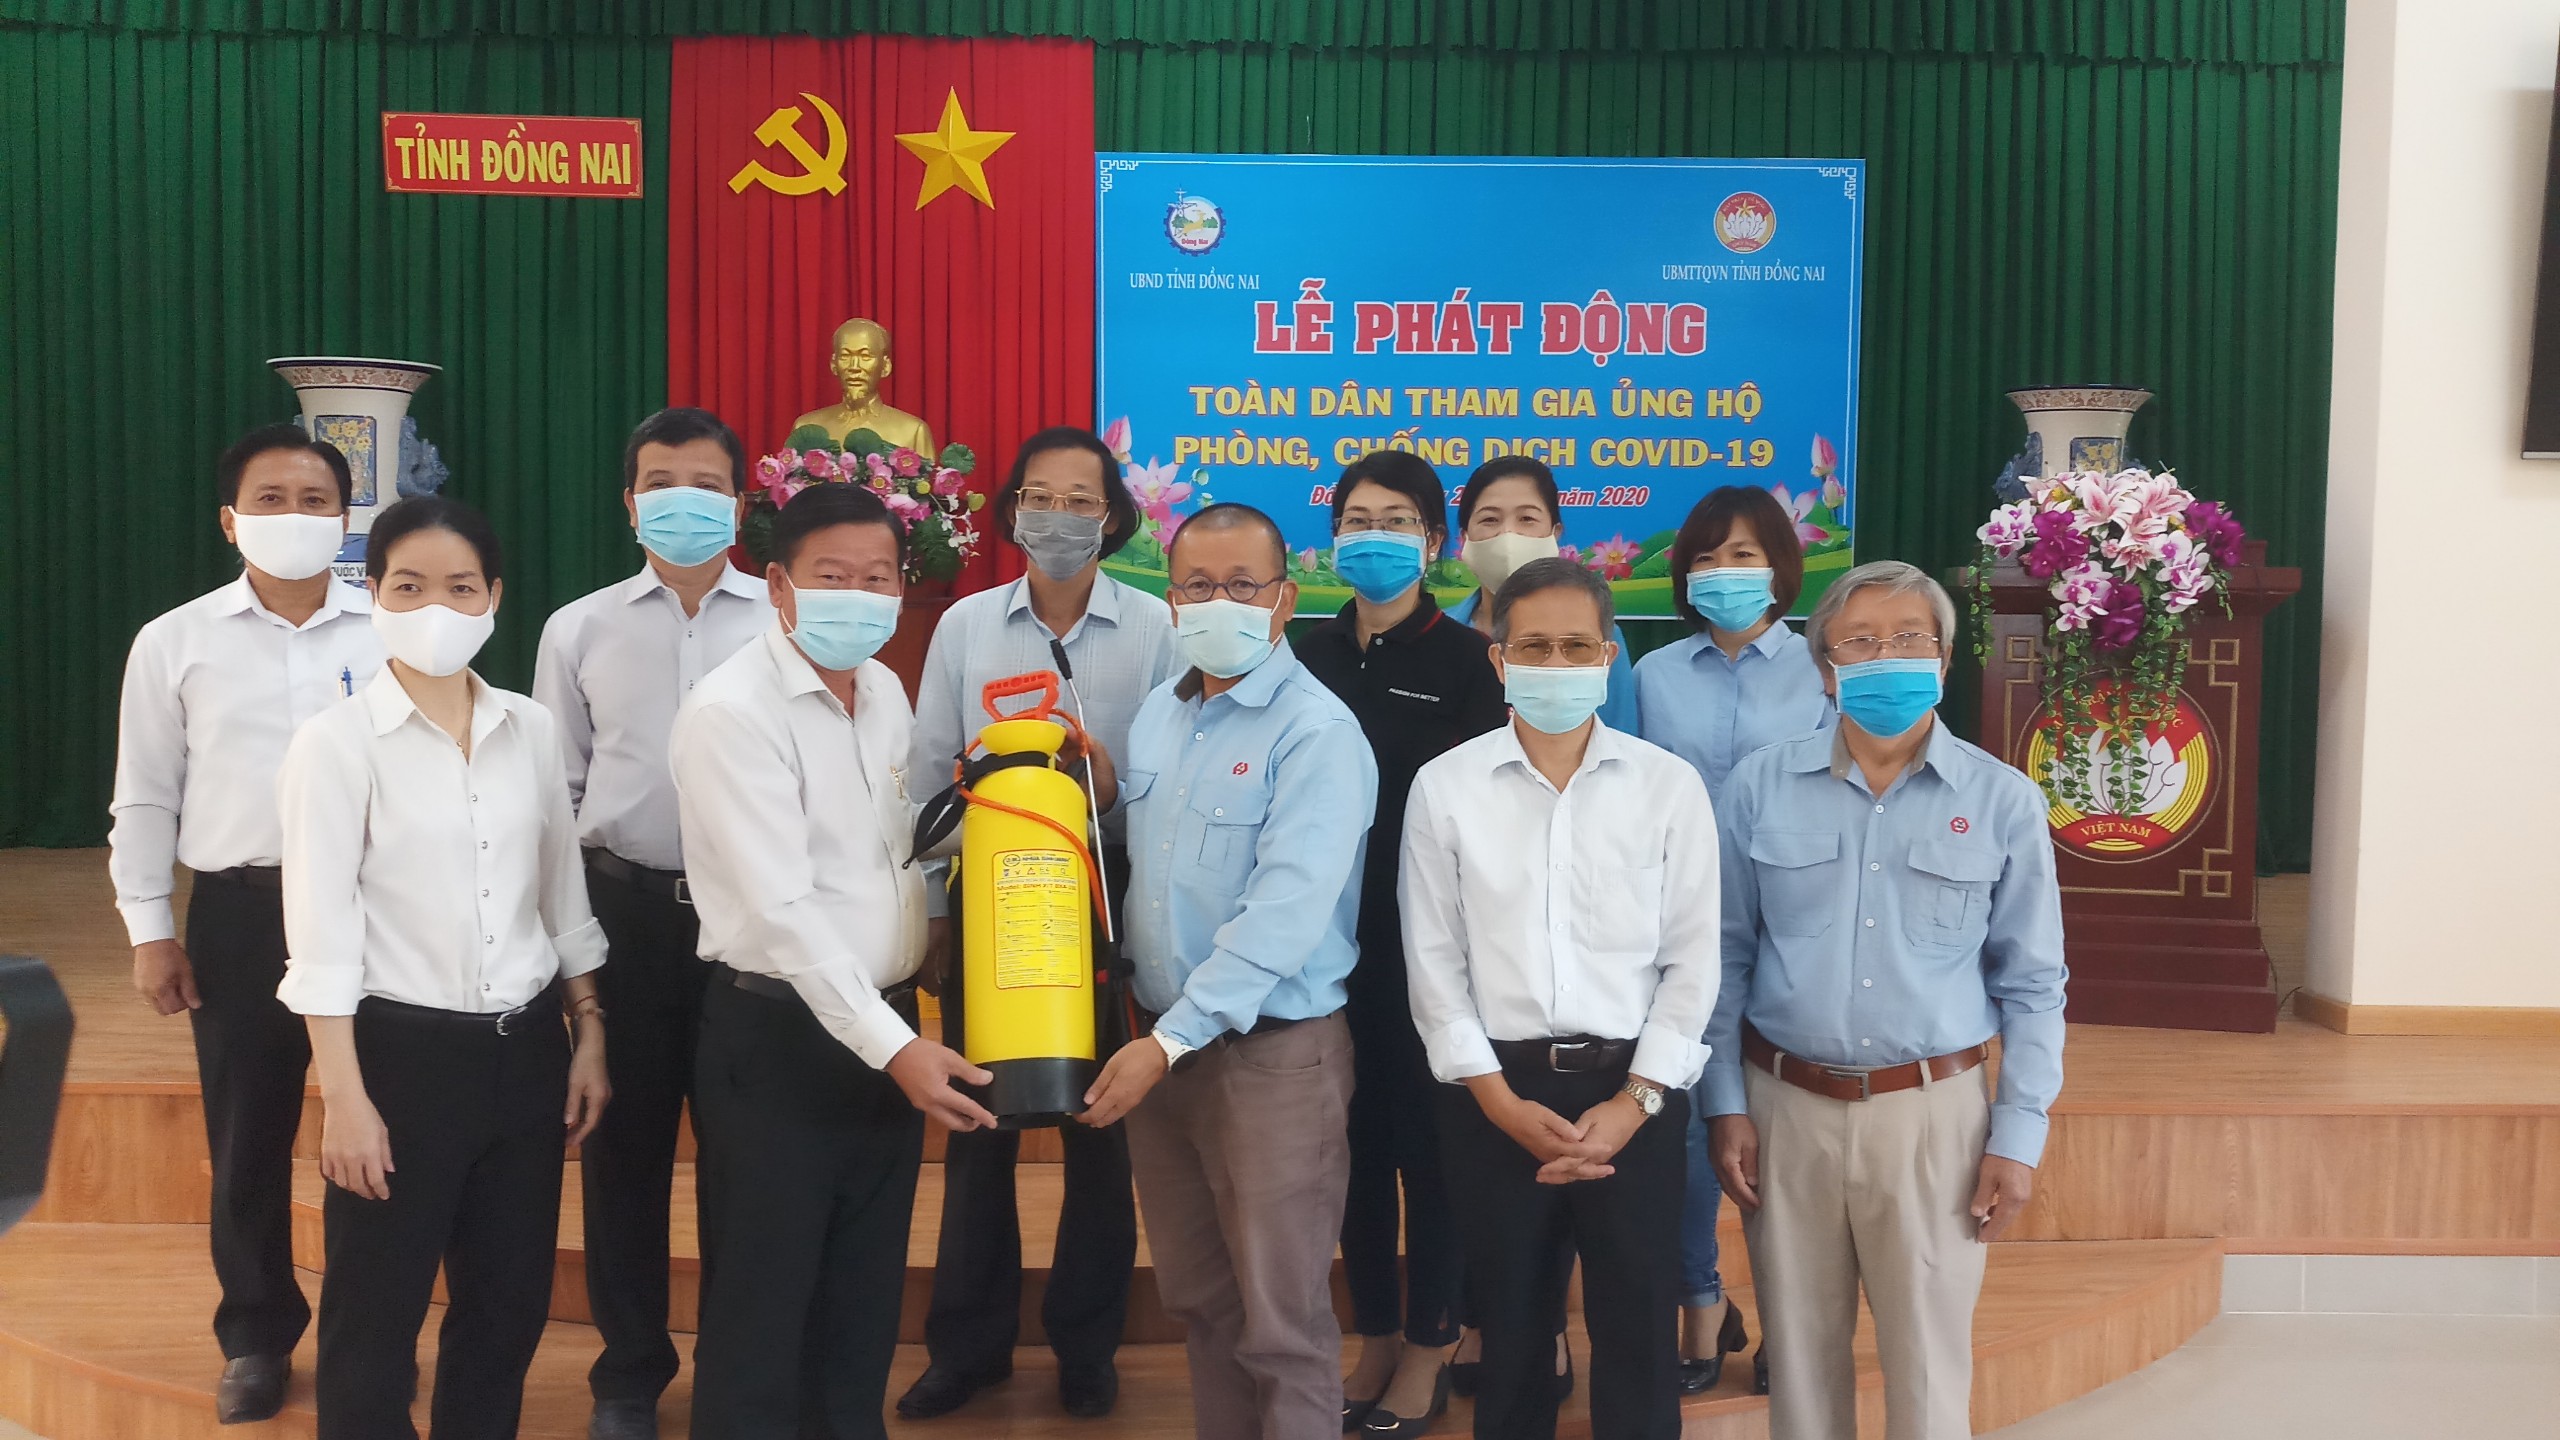 TPC VINA DONATED TO COVID-19 PREVENTION & EPIDEMIC FUND IN DONG NAI PROVINCE